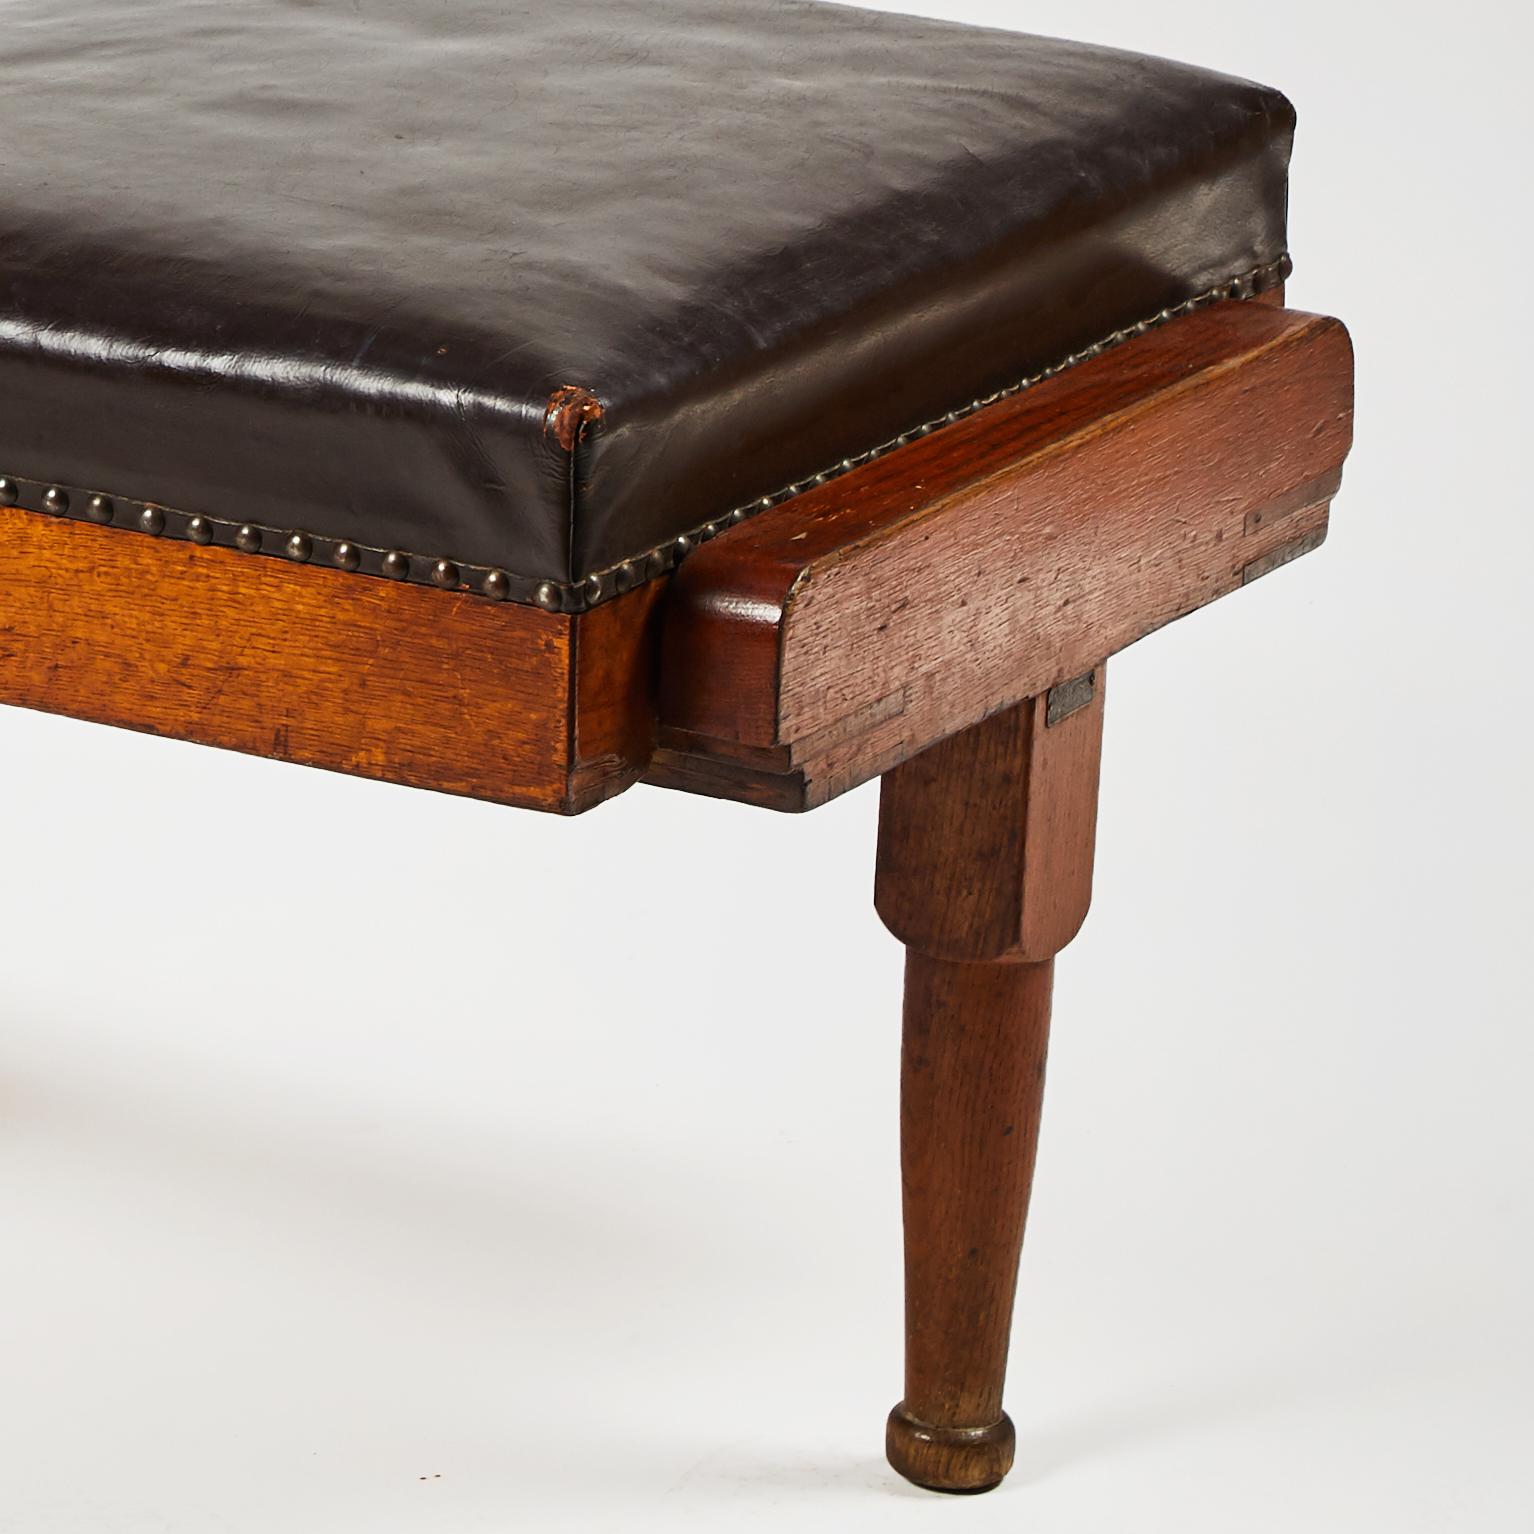 Louis Philippe Reclining Mahogany and Leather Upholstered Chaise from Mid-19th Century France